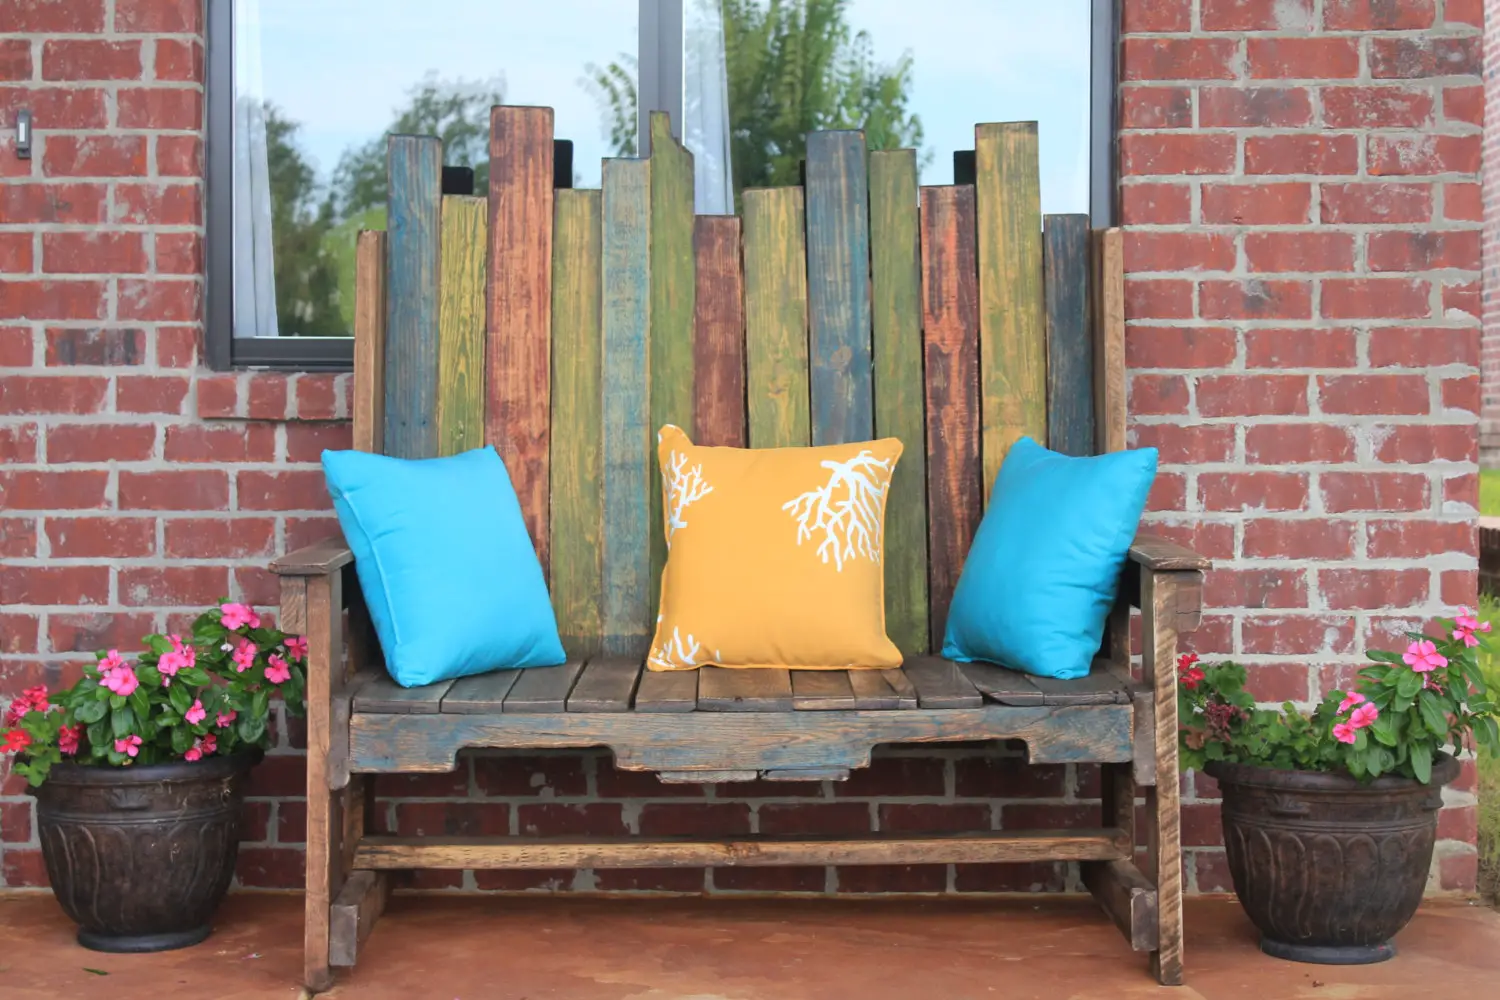 How To Repurpose Wood Pallets As Home Decor